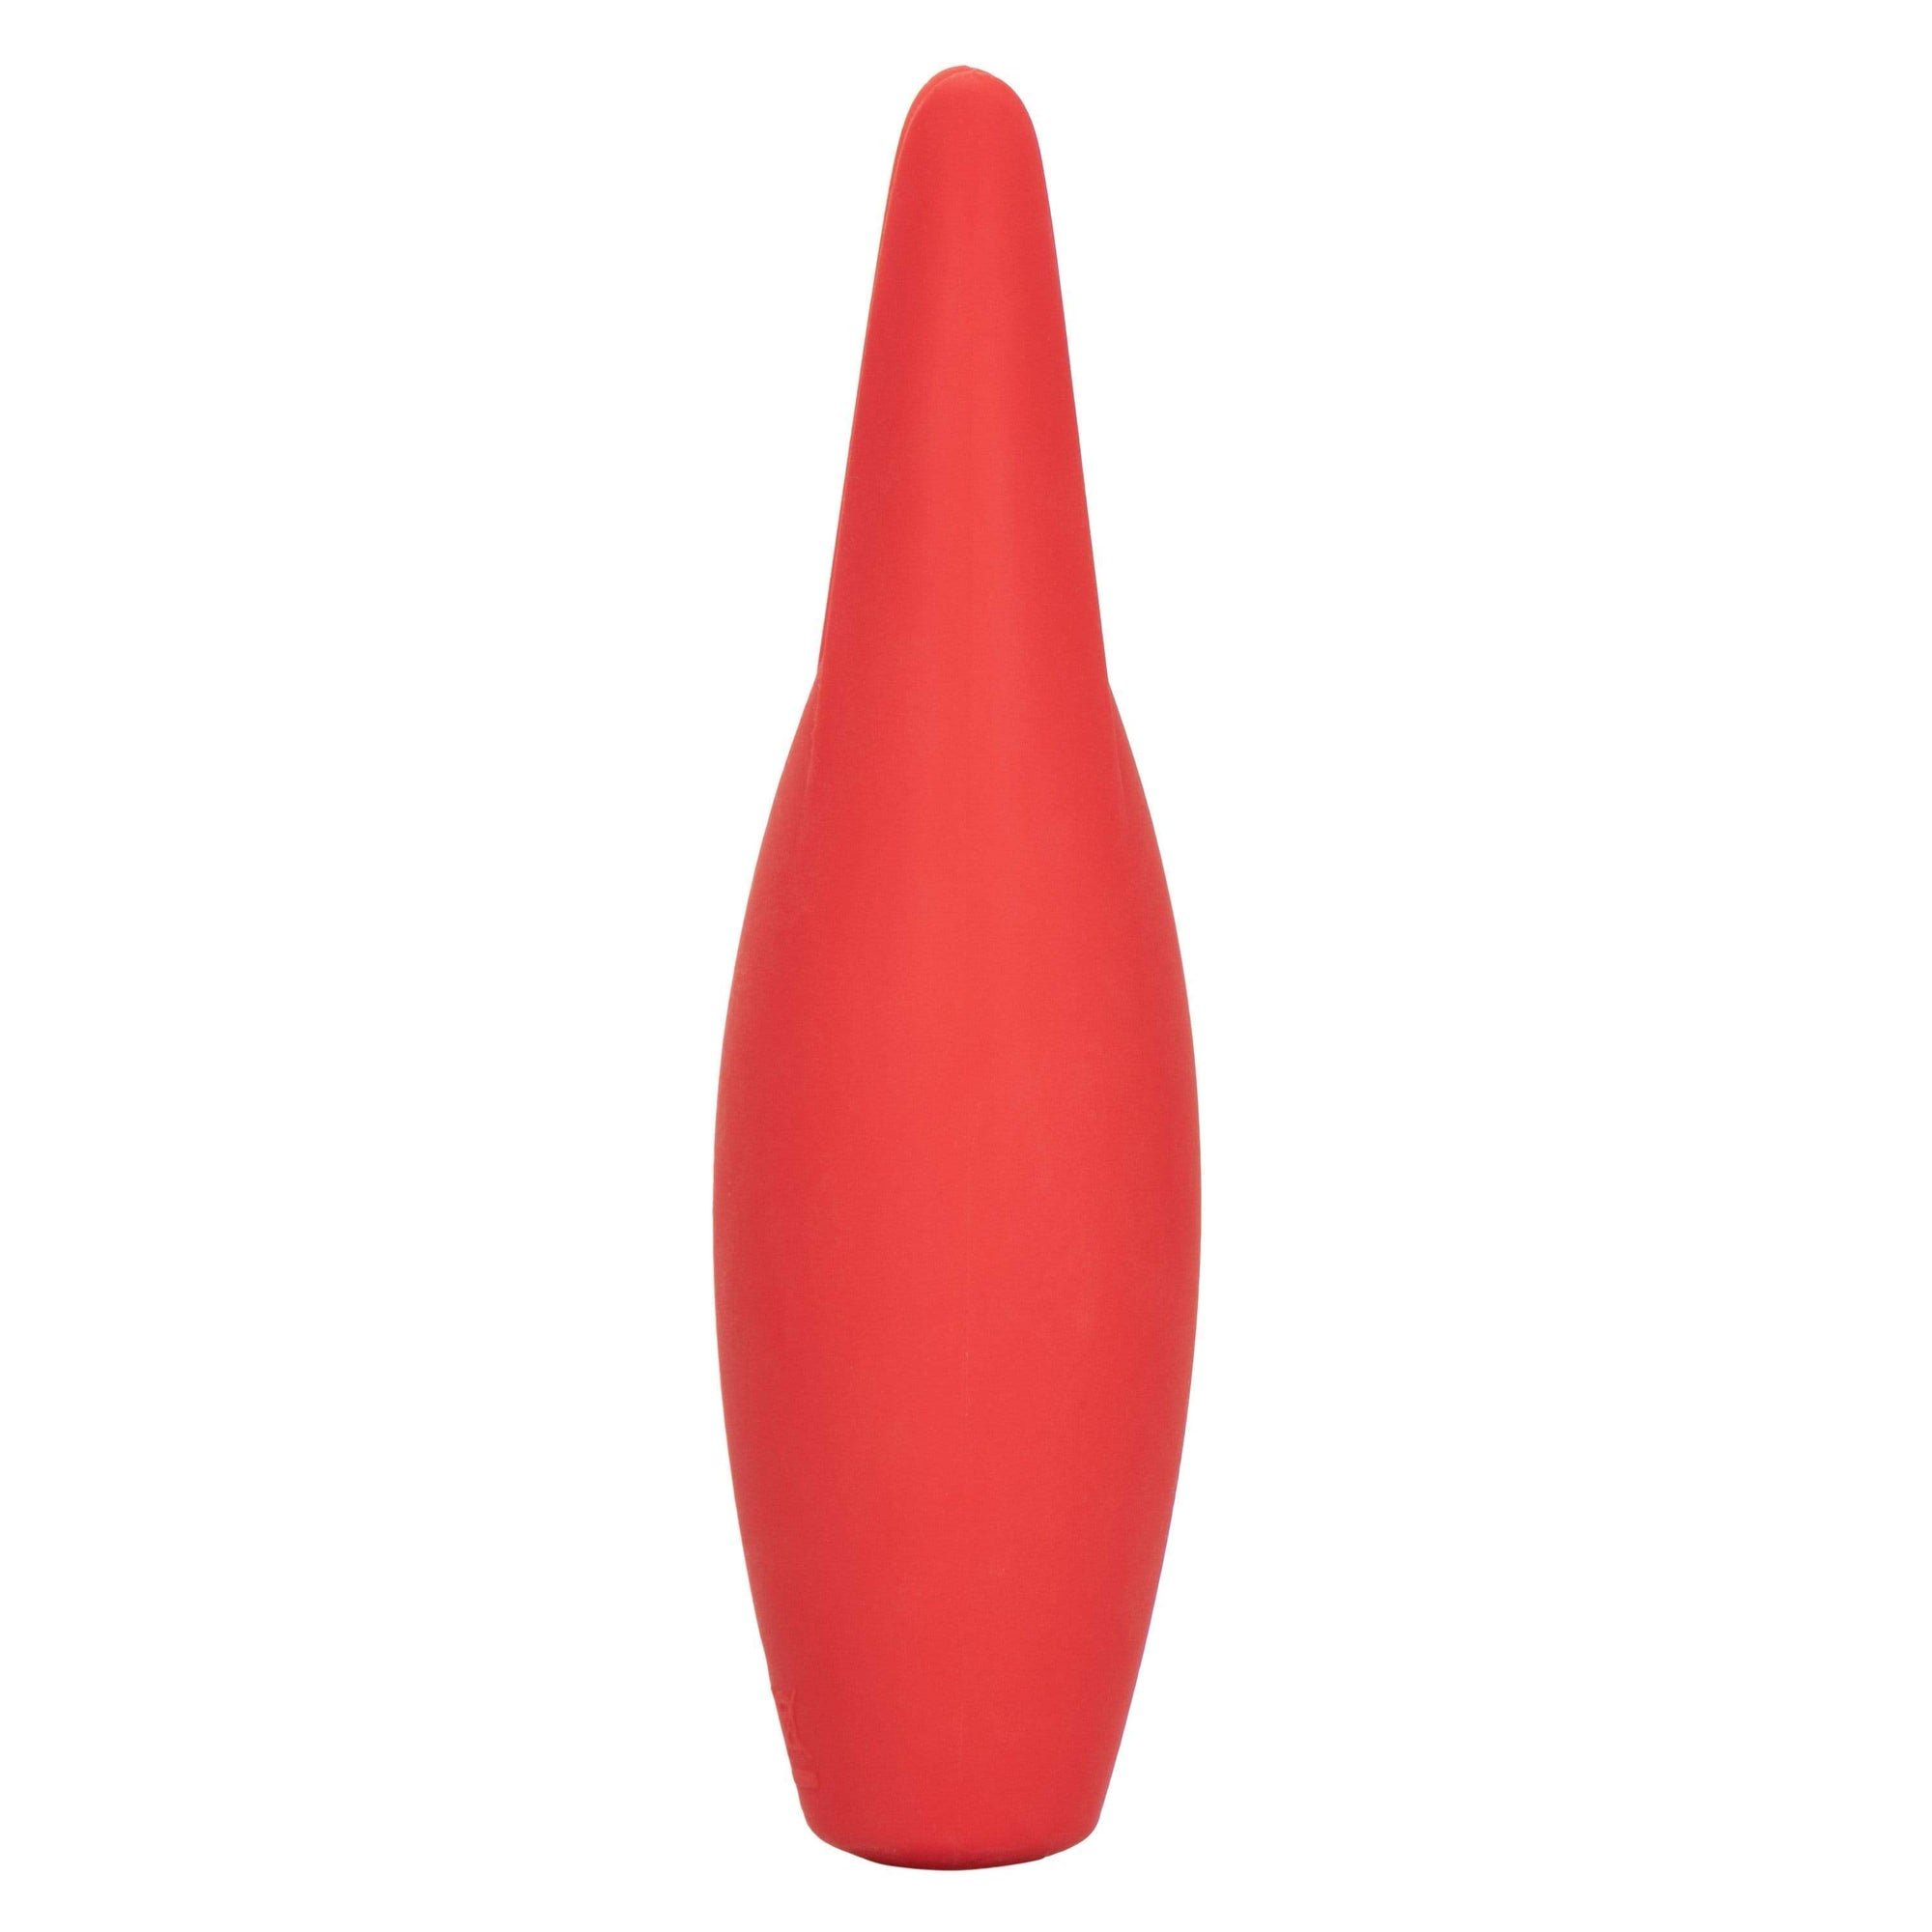 California Exotics - Red Hot Fury Clit Massager (Red) Clit Massager (Vibration) Rechargeable